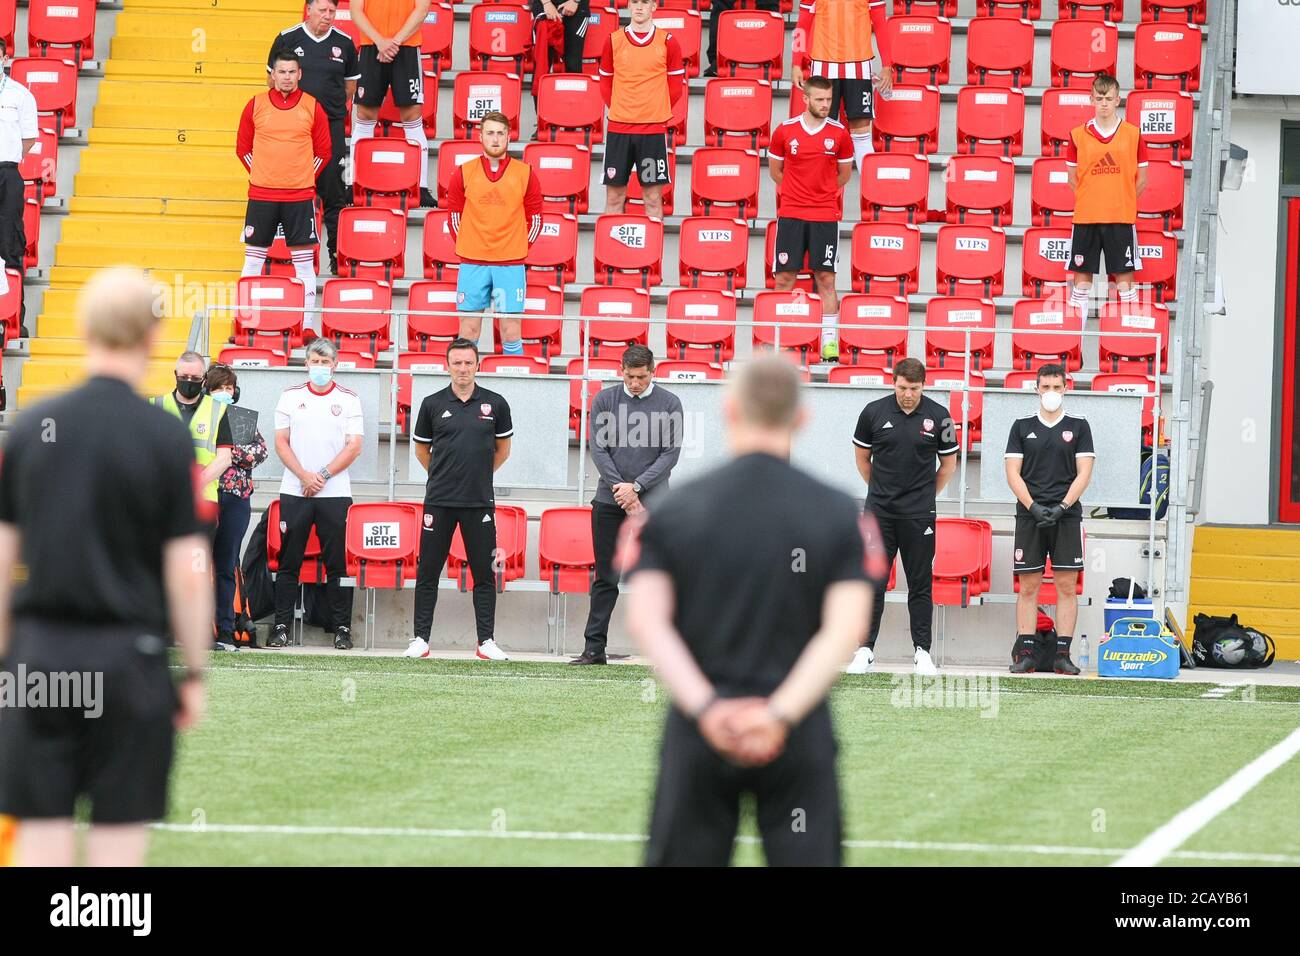 DECLAN DEVINE Derry City FC manager and the rest of the backroom team in a minutes silence in memory of John Hume before the Airtricity League fixture Stock Photo